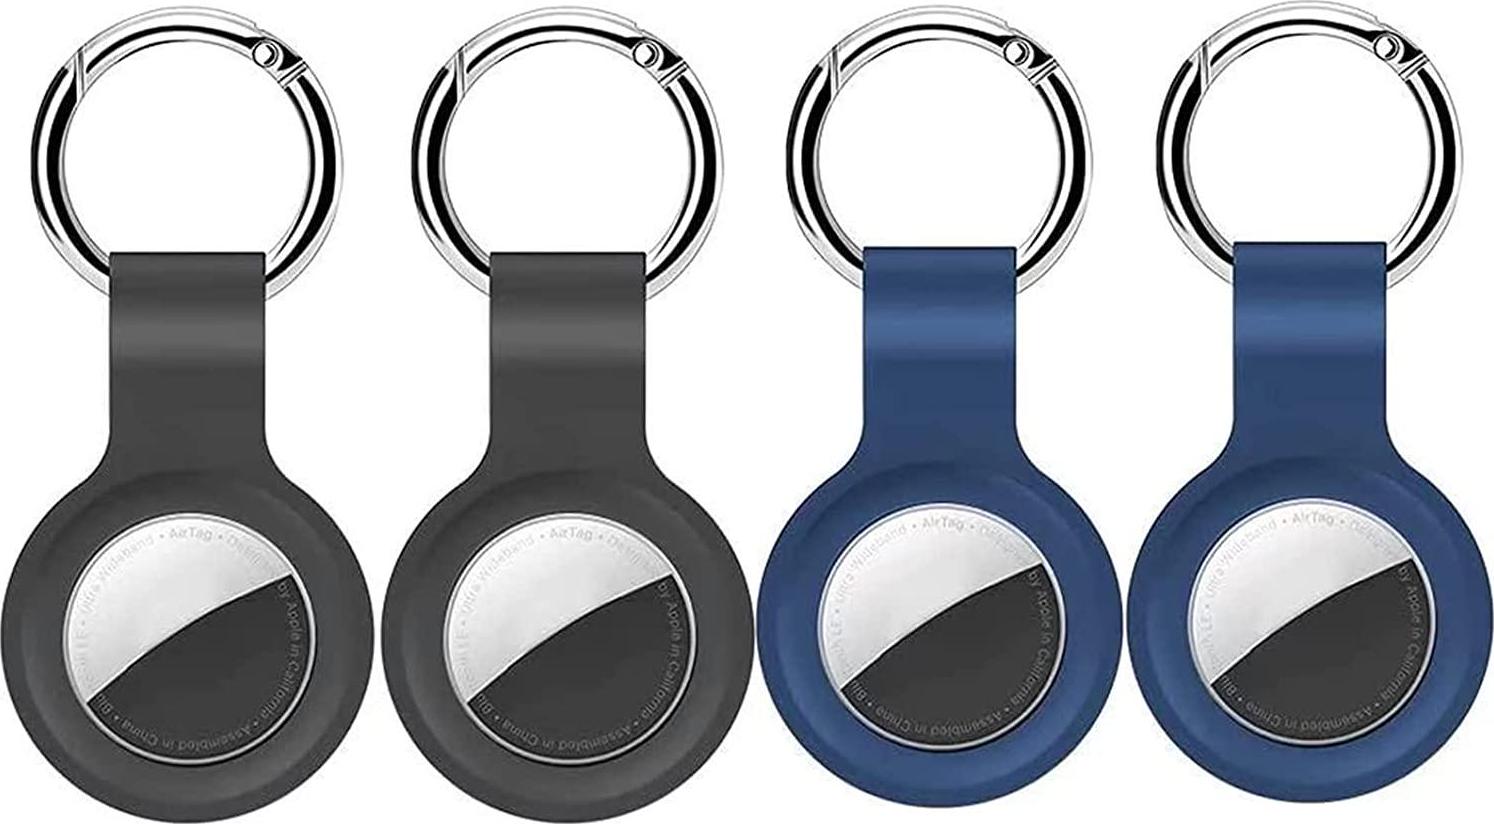 GENREEN, Keyring for AirTag Case- 4 Pack Silicone Protective Case for Apple AirTags Key Ring, Anti-Scratch for AirTag Holder Keychain Key Finder Accessories for Wallet Air Tag Case,Grey/Blue